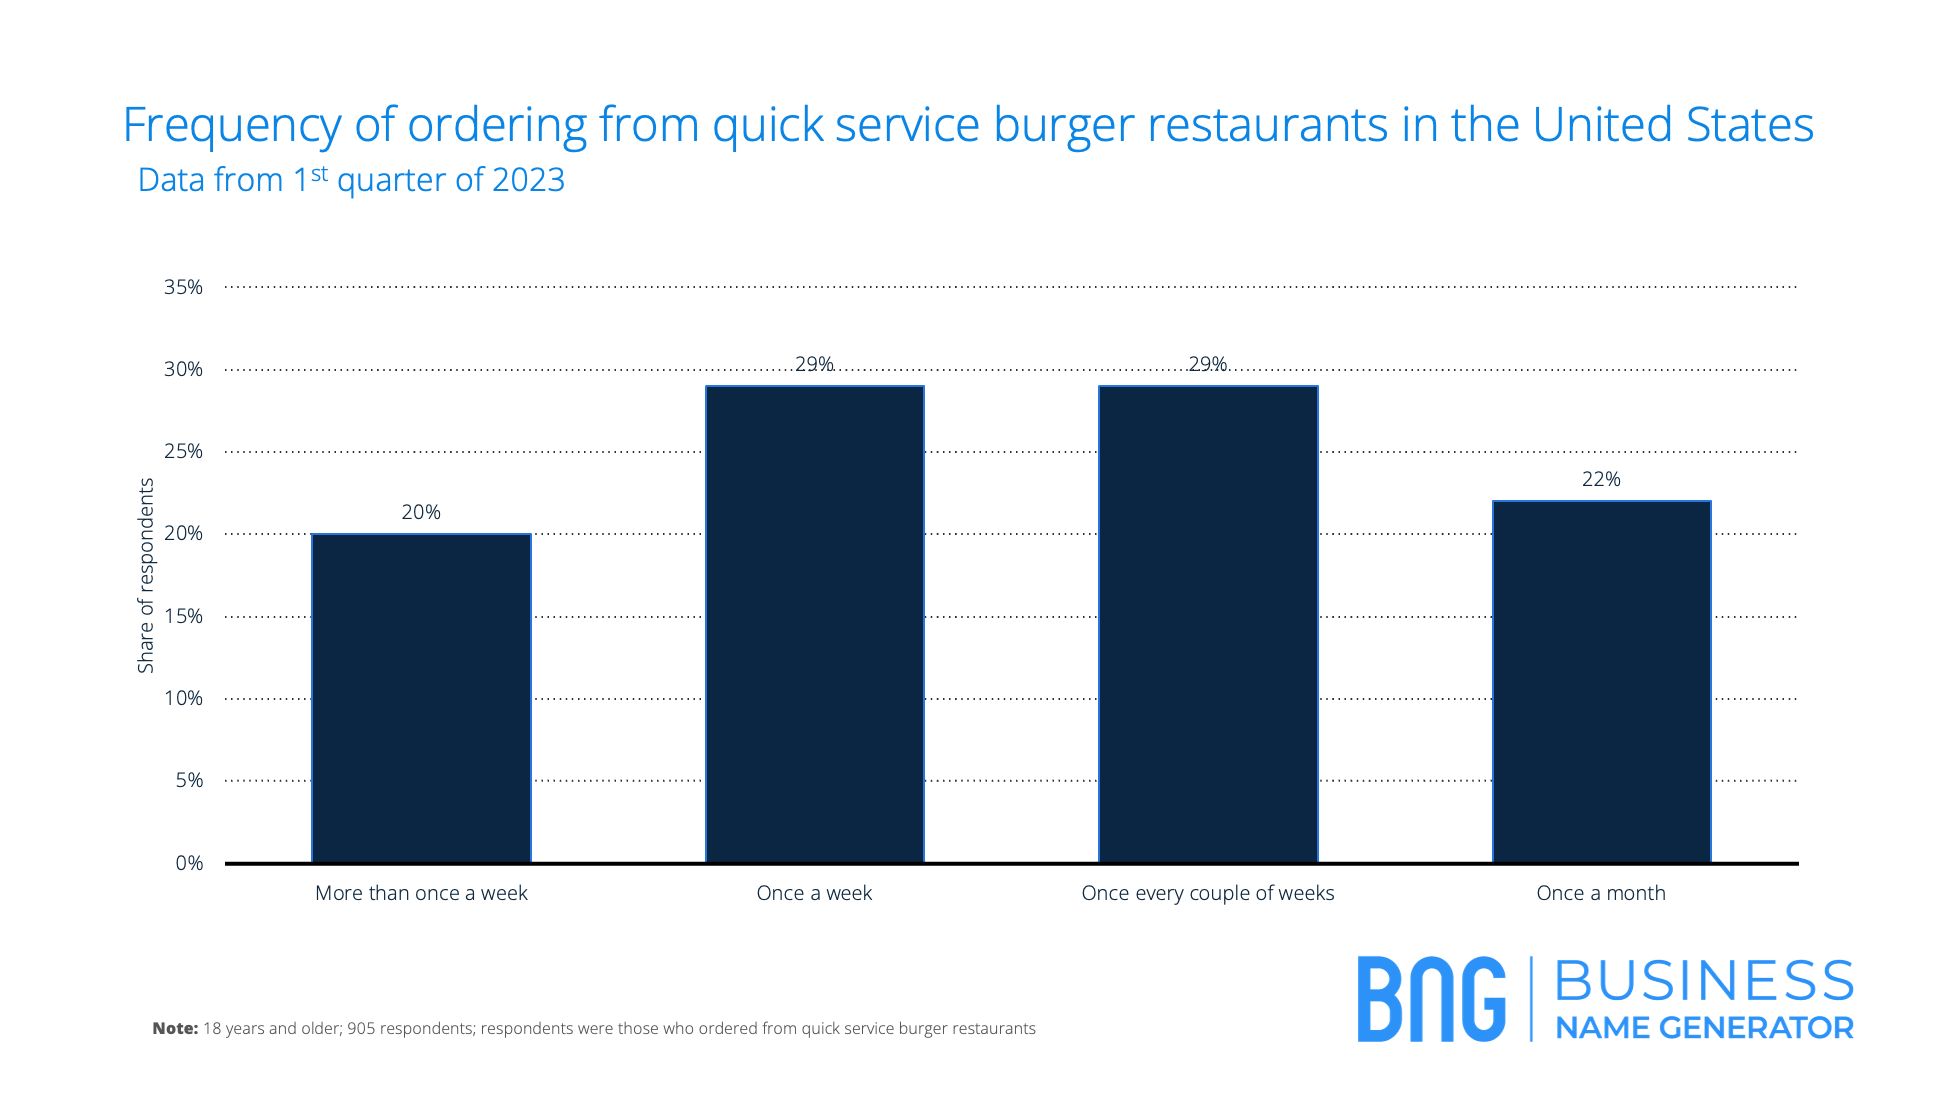 A graph for Frequency of ordering from quick service burger restaurants in the United States